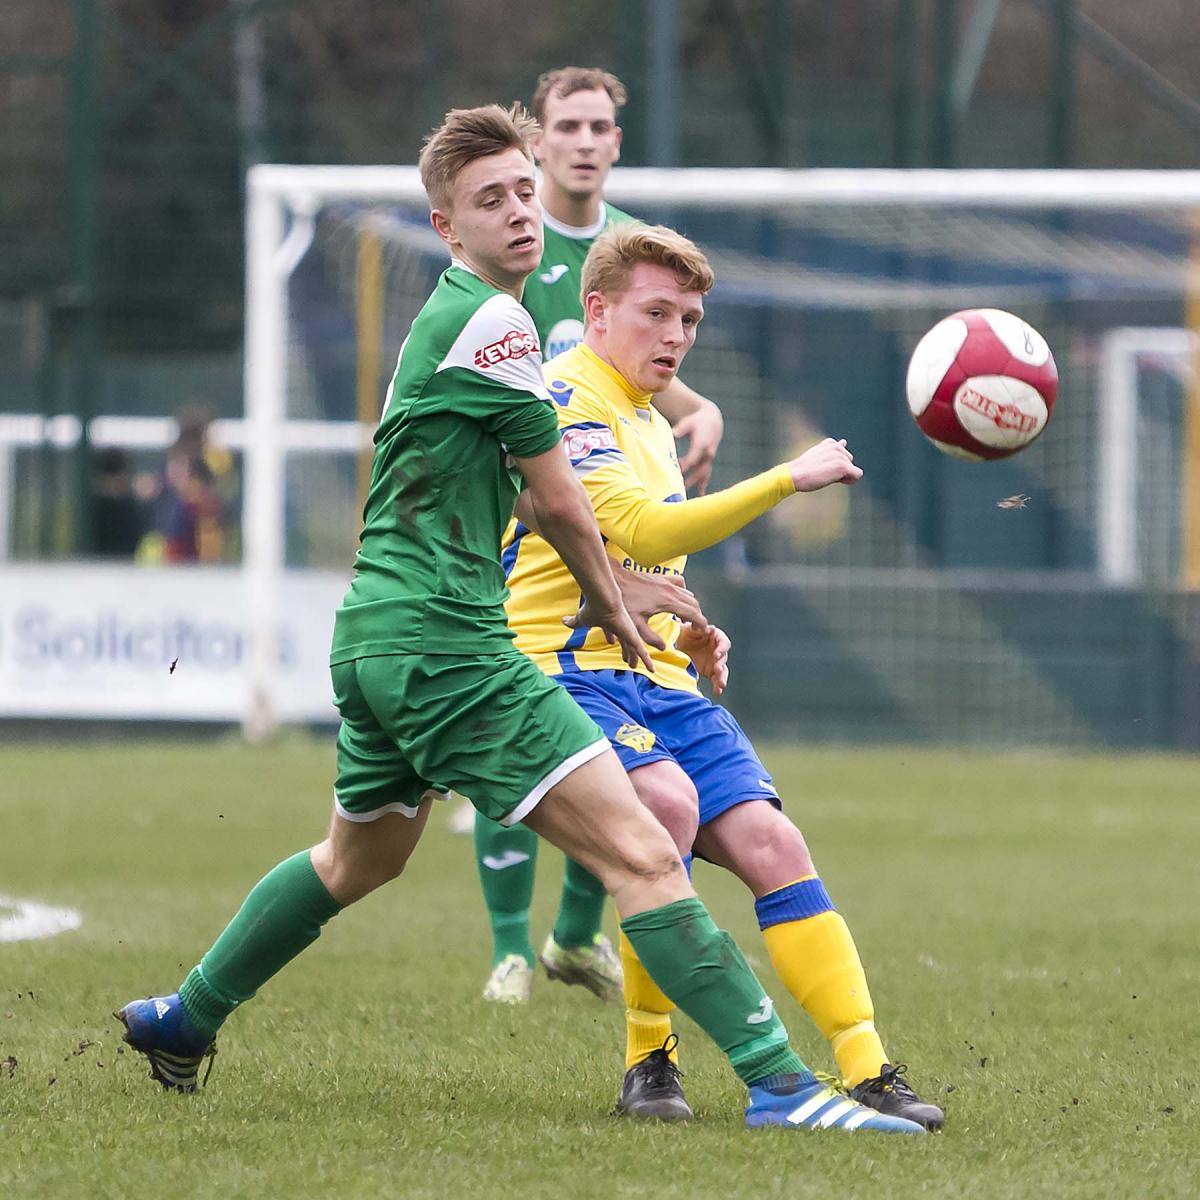 All the action from Warrington Town's 2-1 victory over Frickley Athletic. Pictures by John Hopkins.